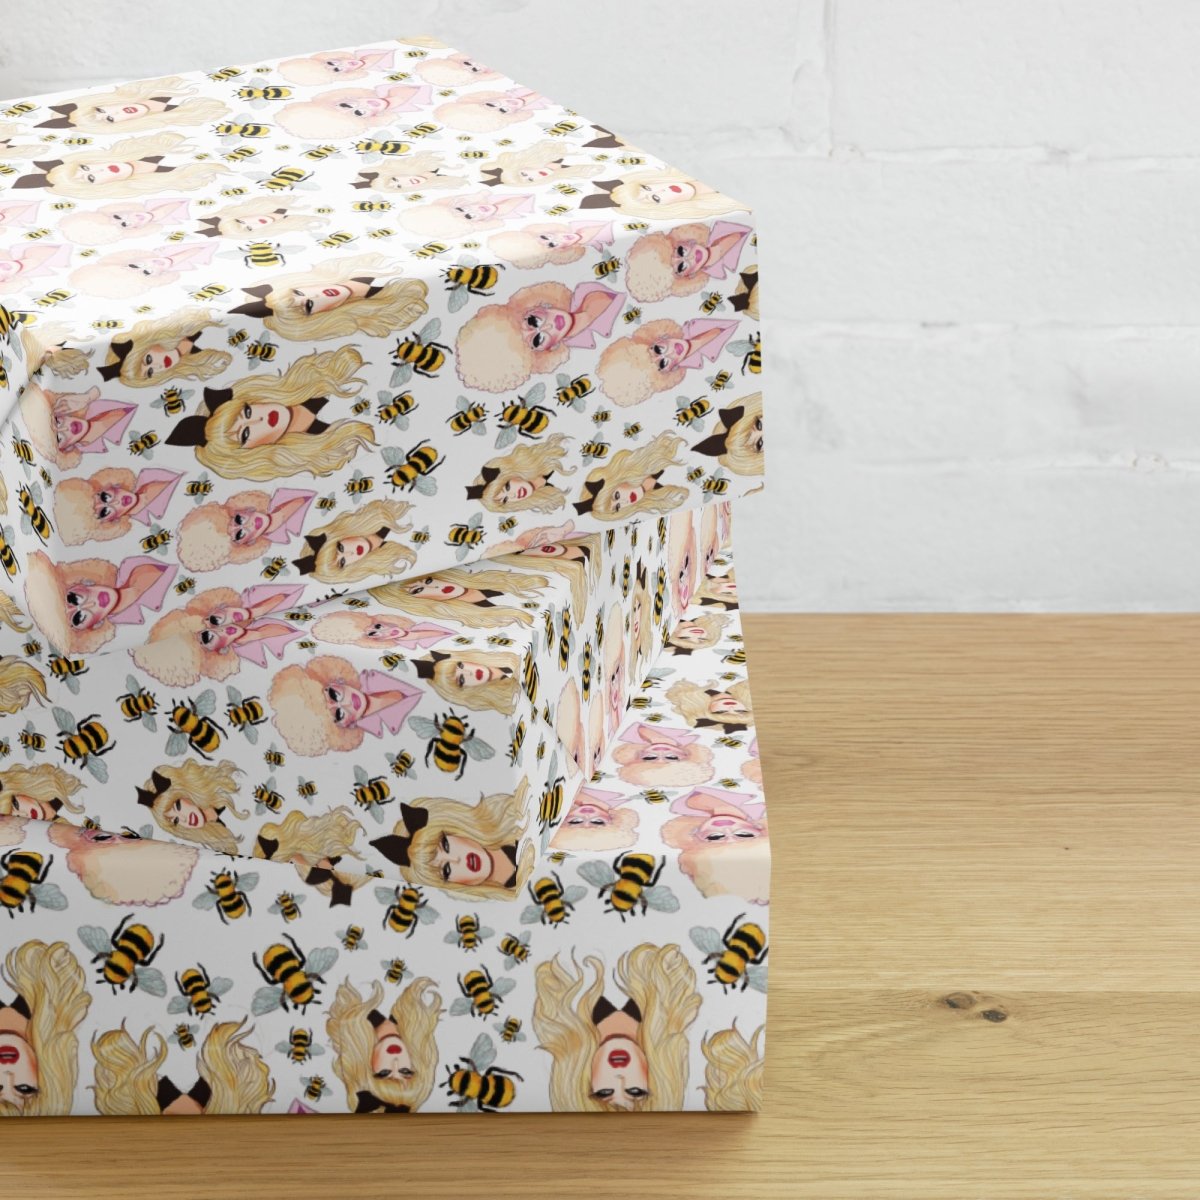 Trixie & Katya - Bees Wrapping paper sheets - dragqueenmerch